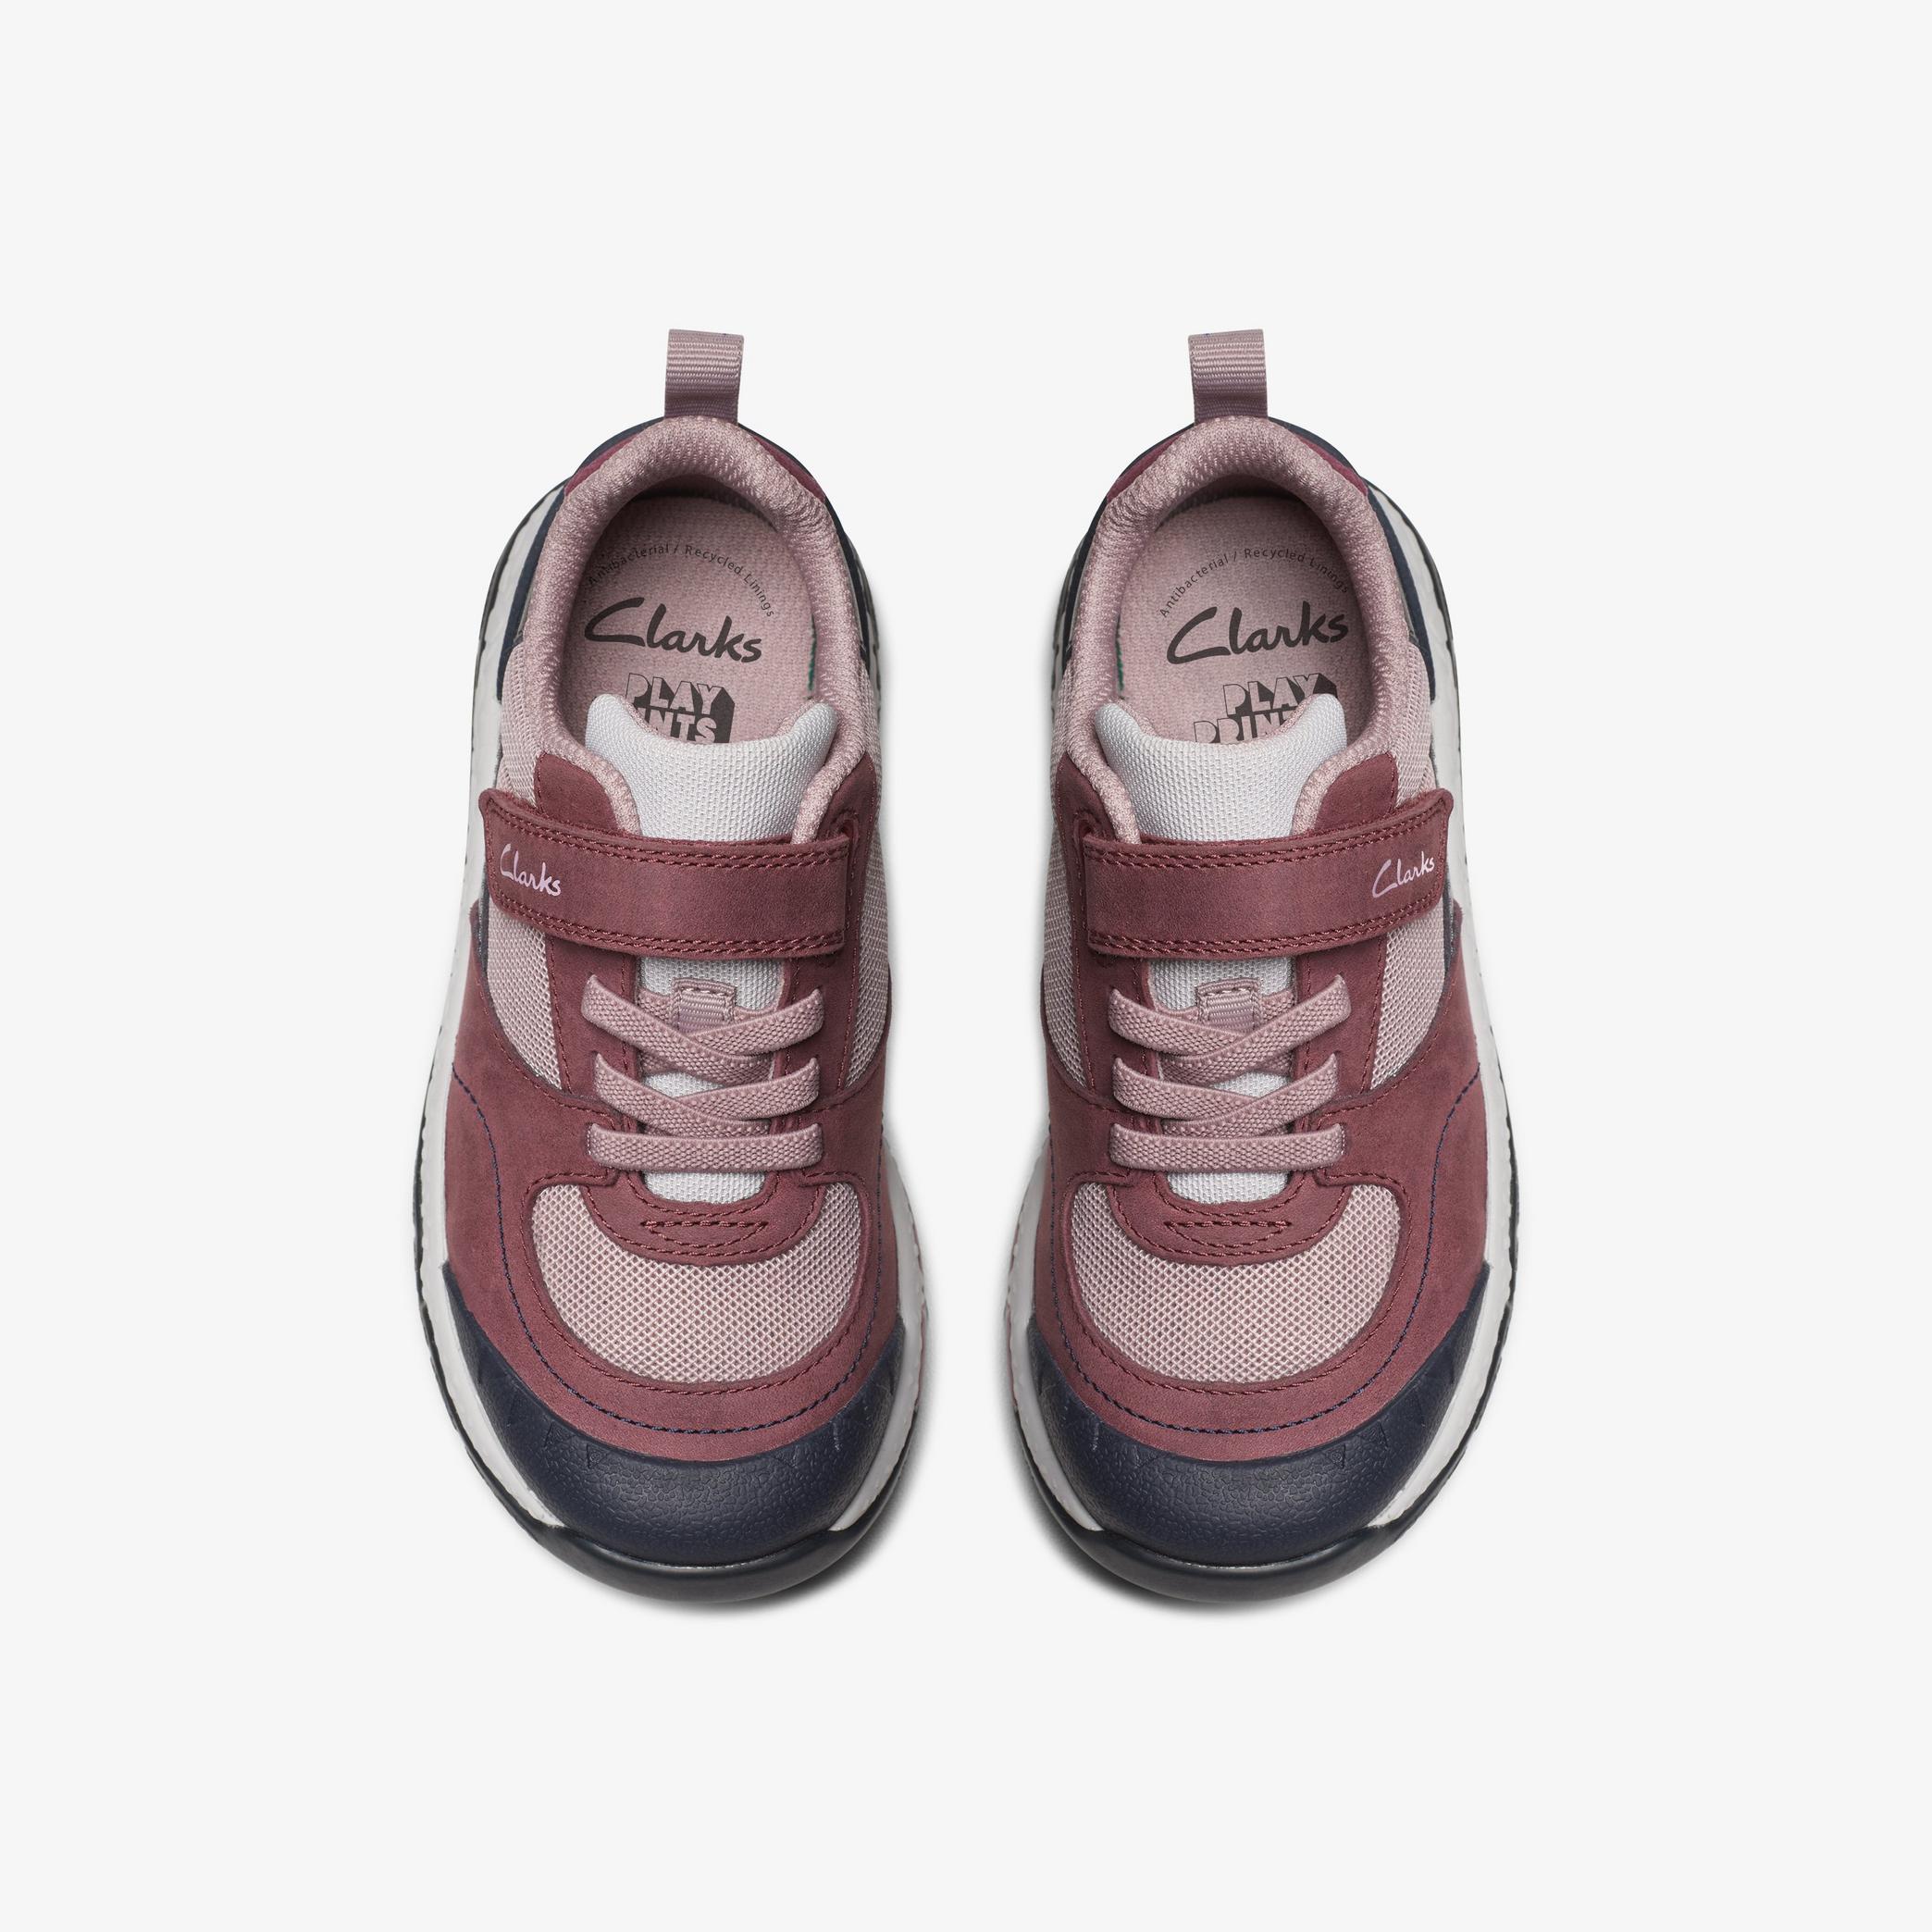 Girls Steggy Stride Kid Berry Leather Shoes | Clarks UK